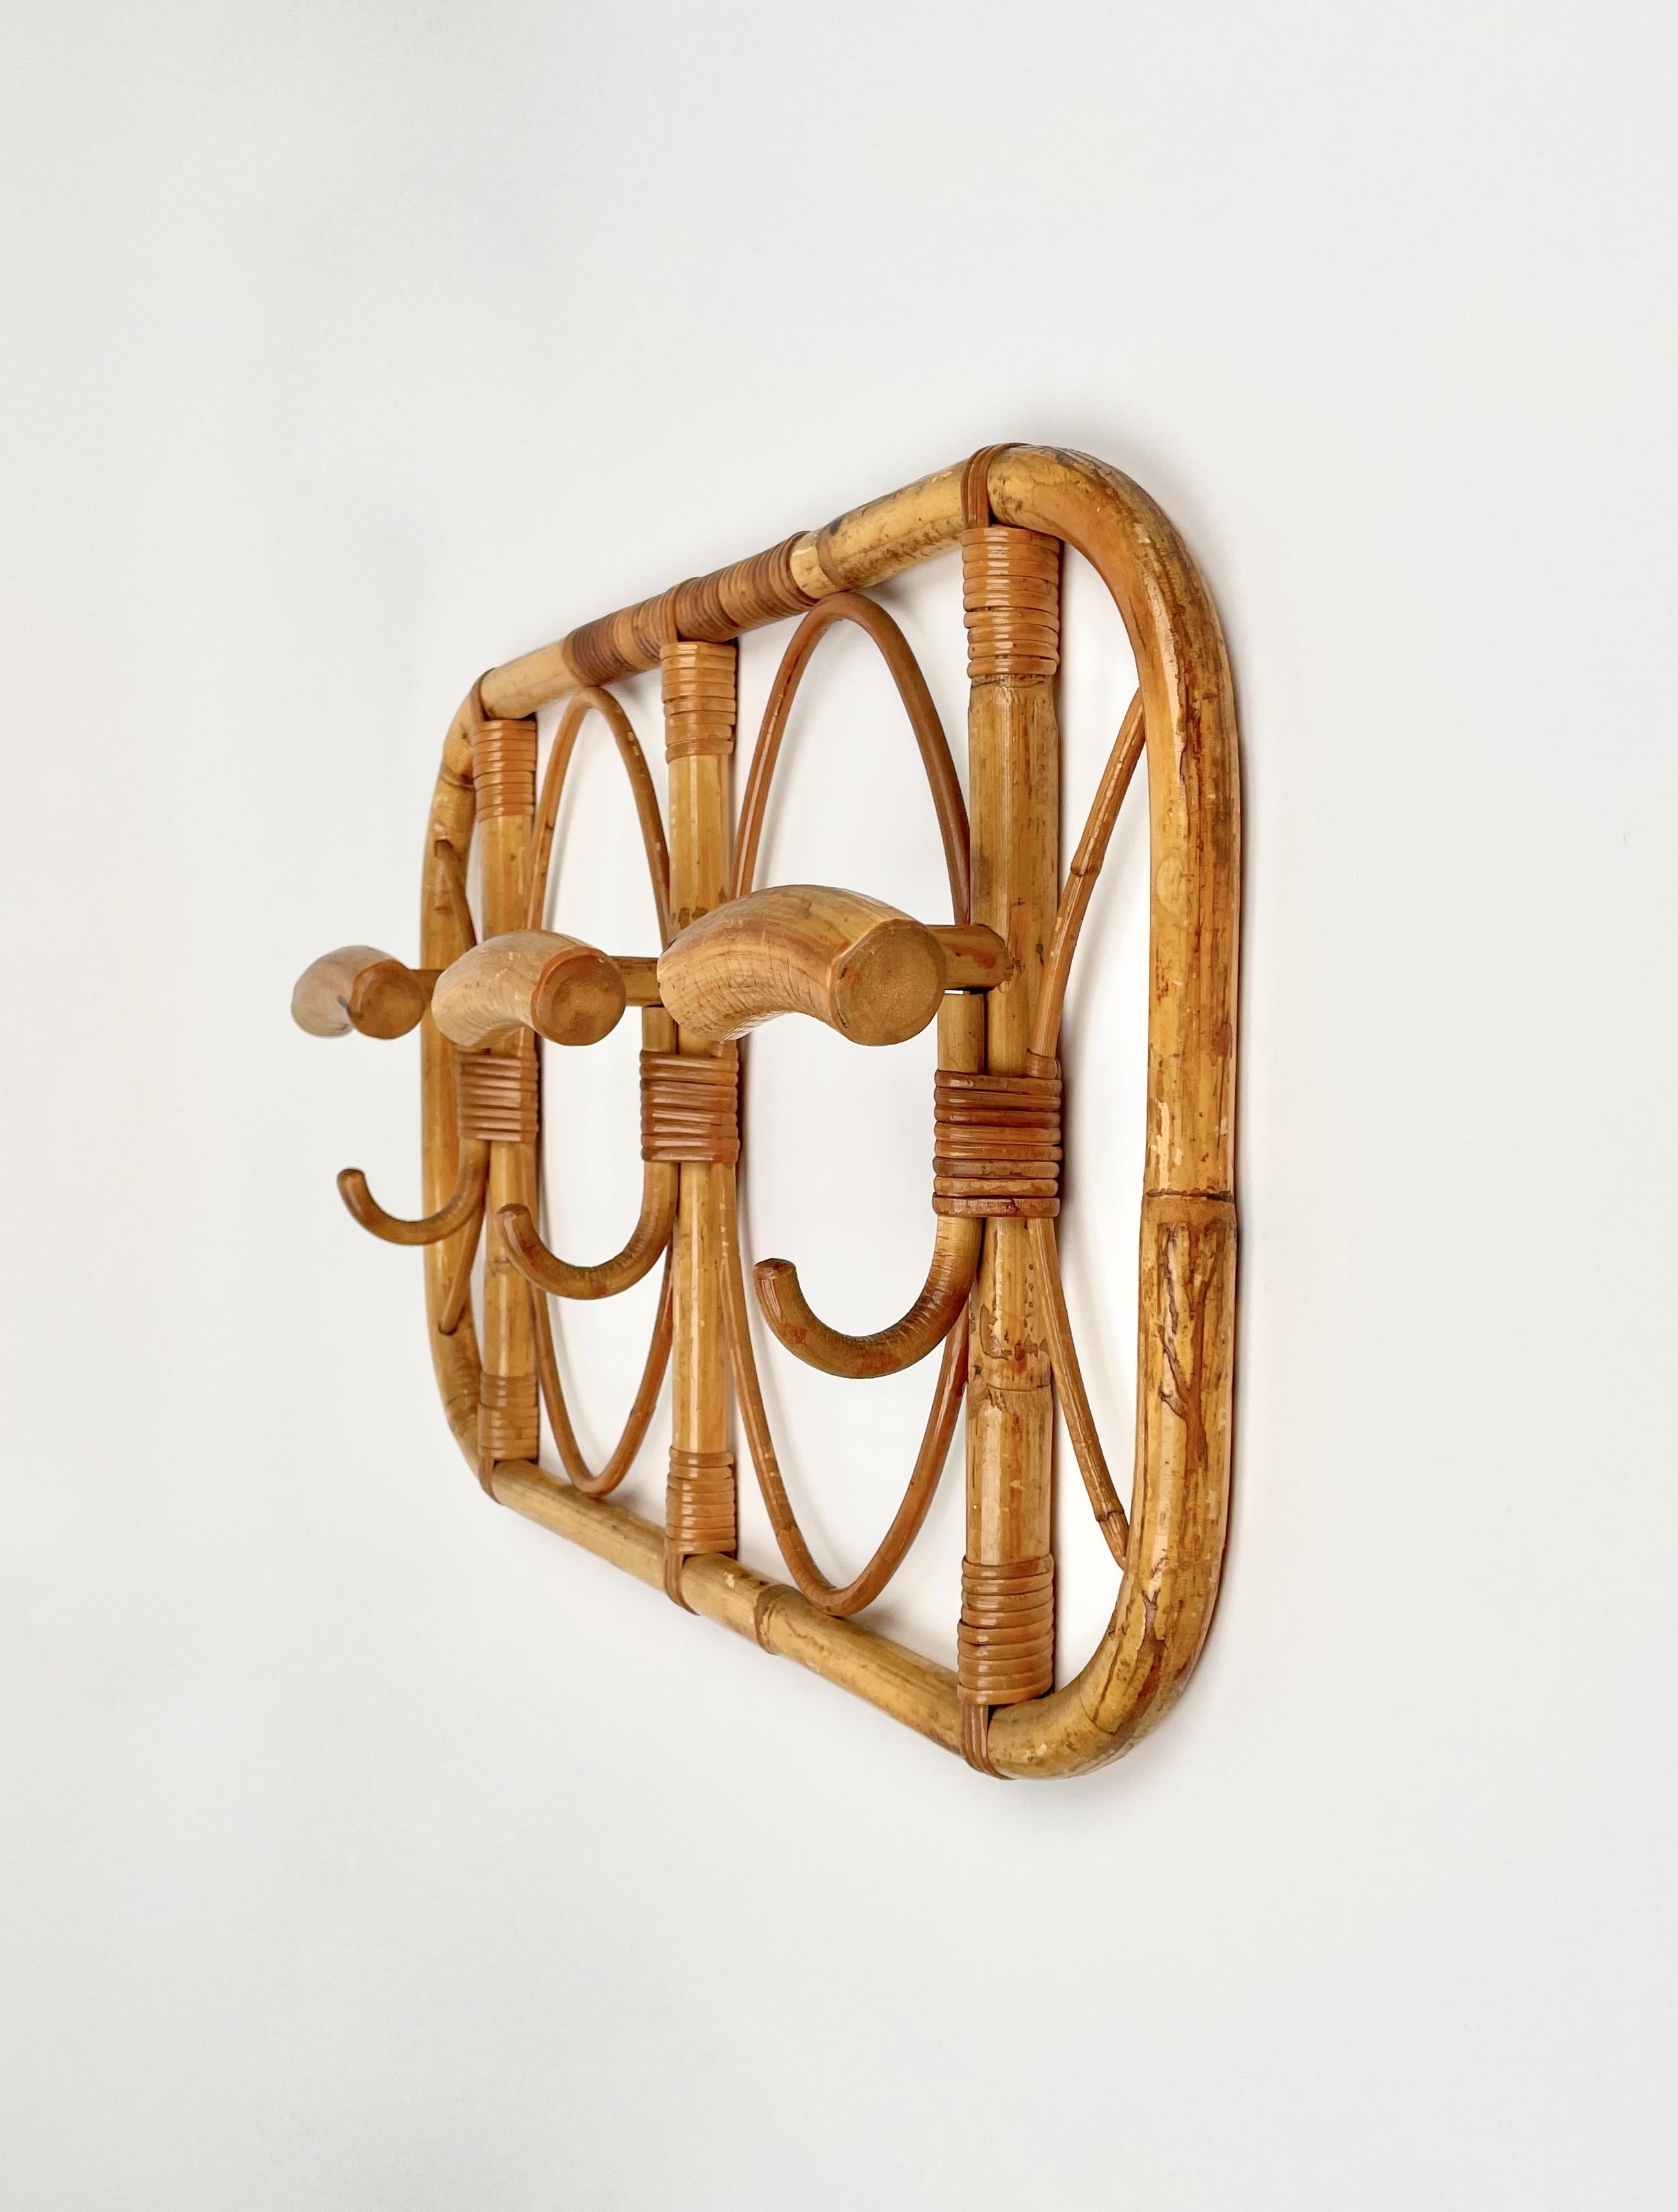 Midcentury Bamboo and Rattan Coat Rack, Italy 1960s For Sale 1